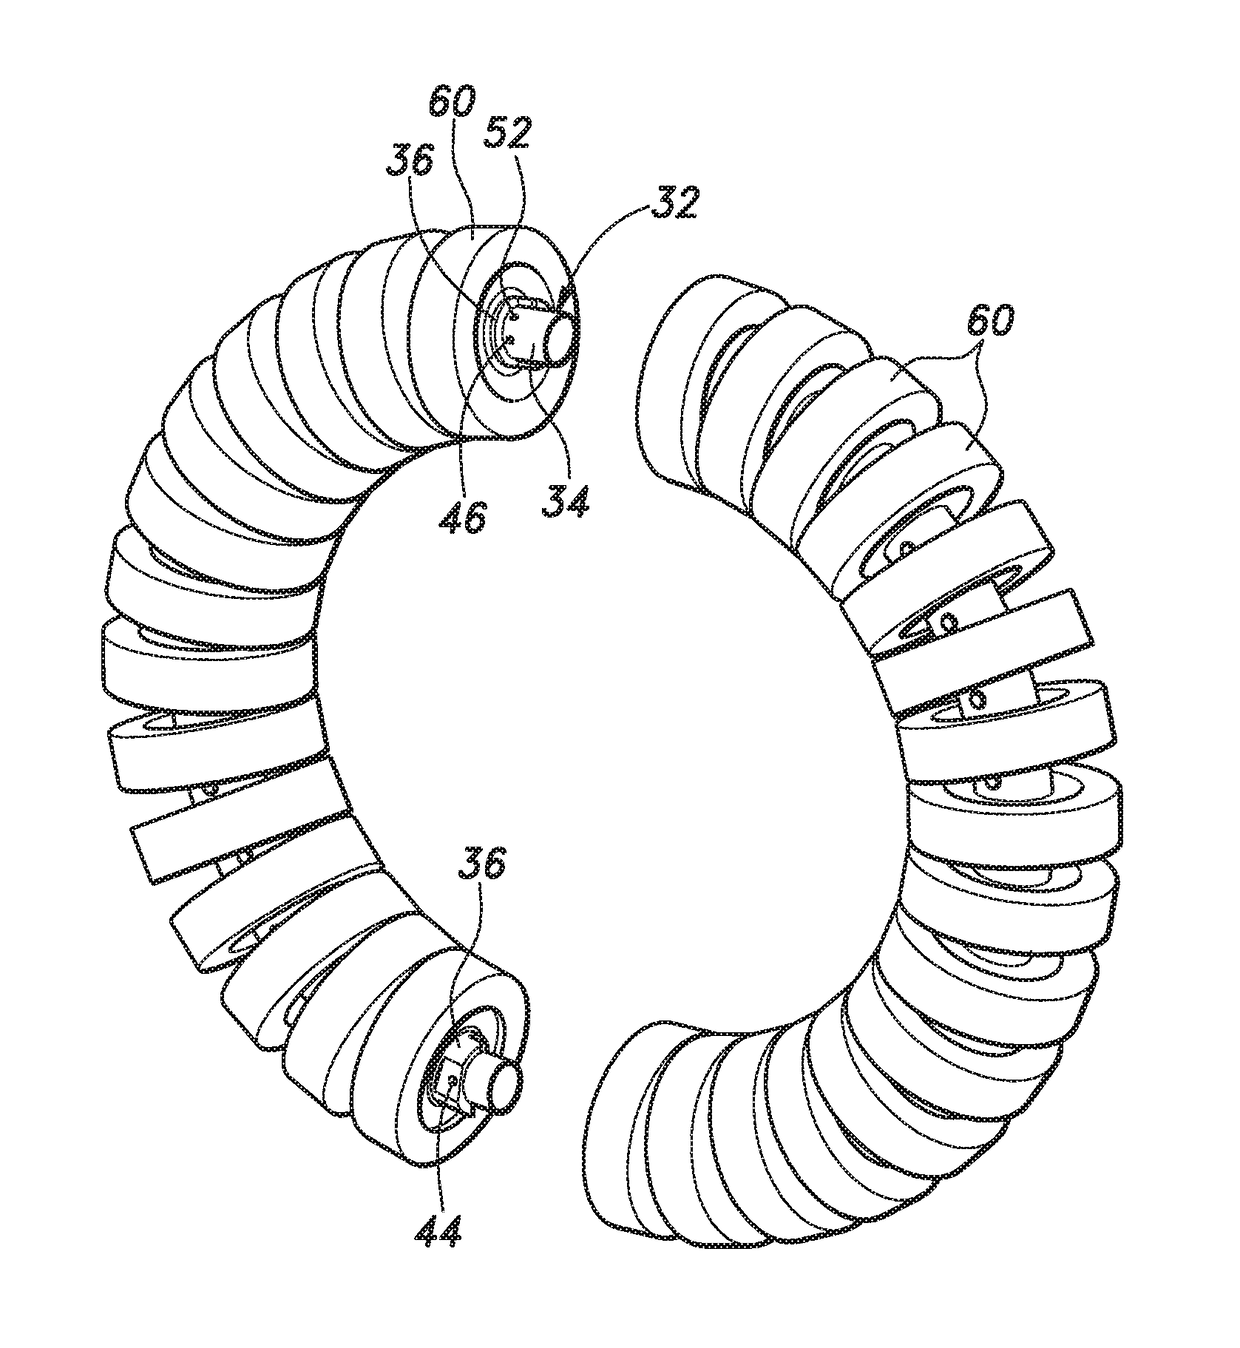 Omni-wheel, frictional propulsion device and omni-directional vehicle